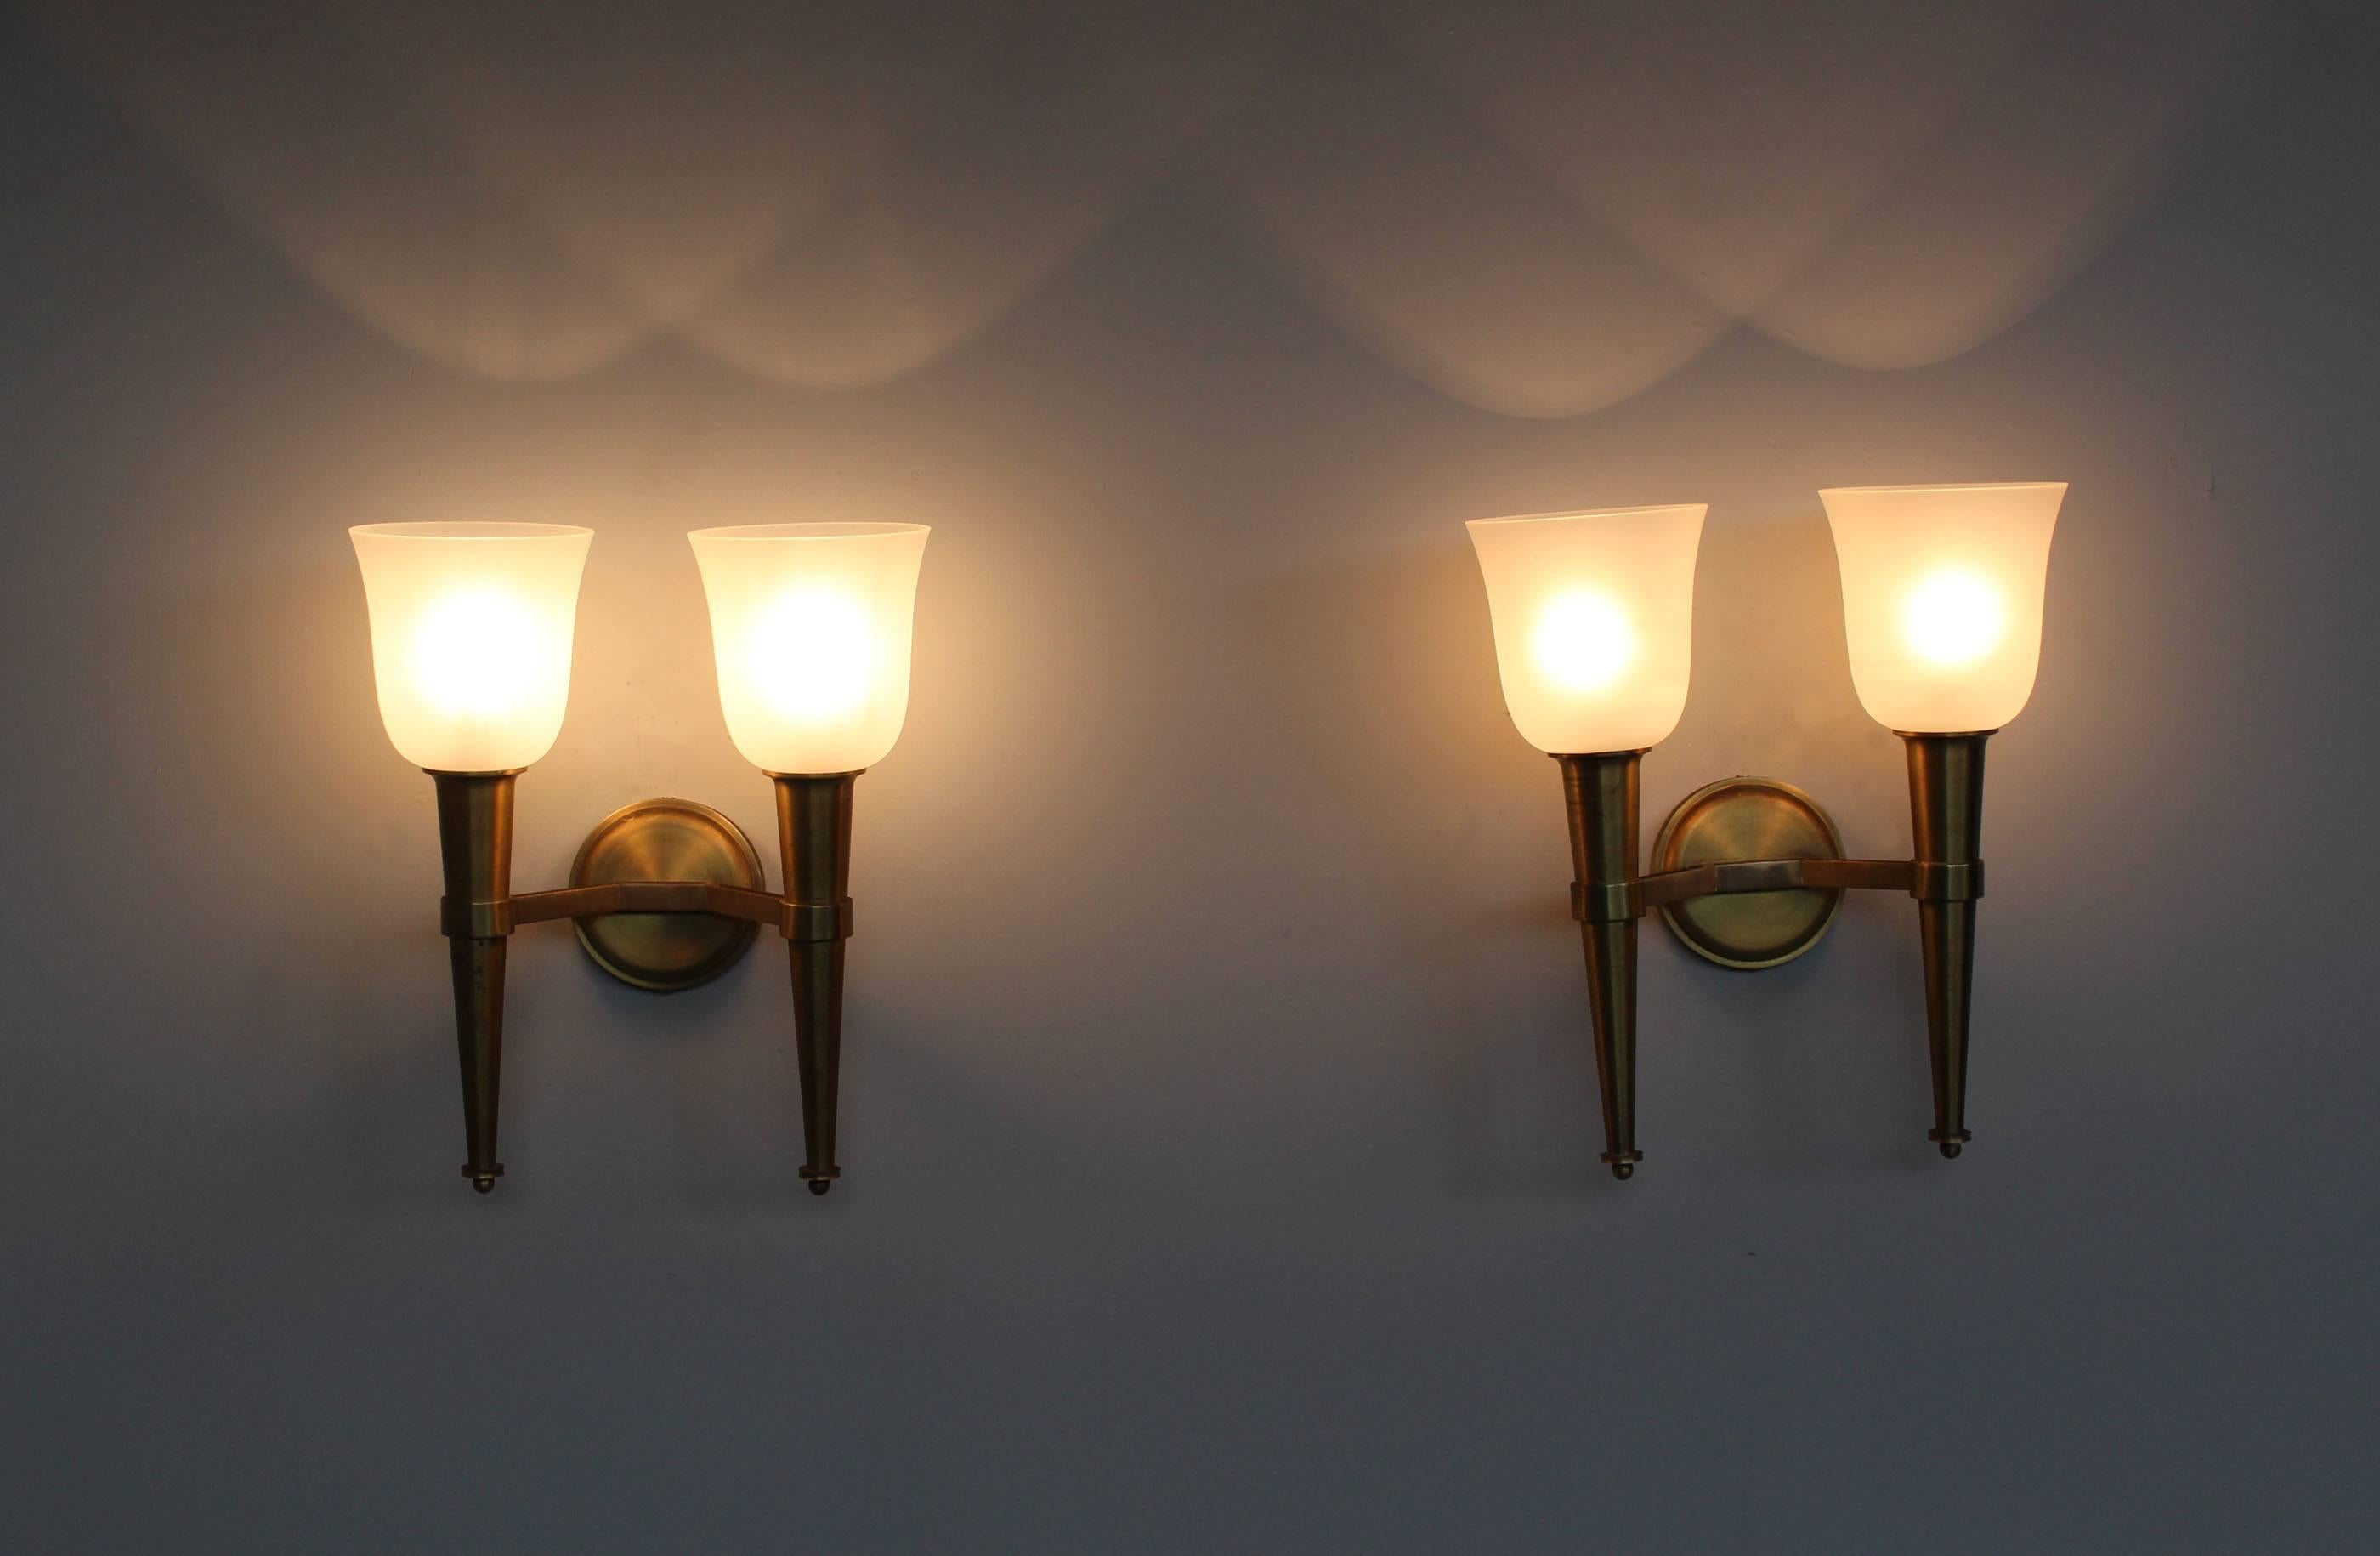 In bronze with frosted glass tulip shape shade.
Price is for one pair and includes US re-wiring. Two pairs available.